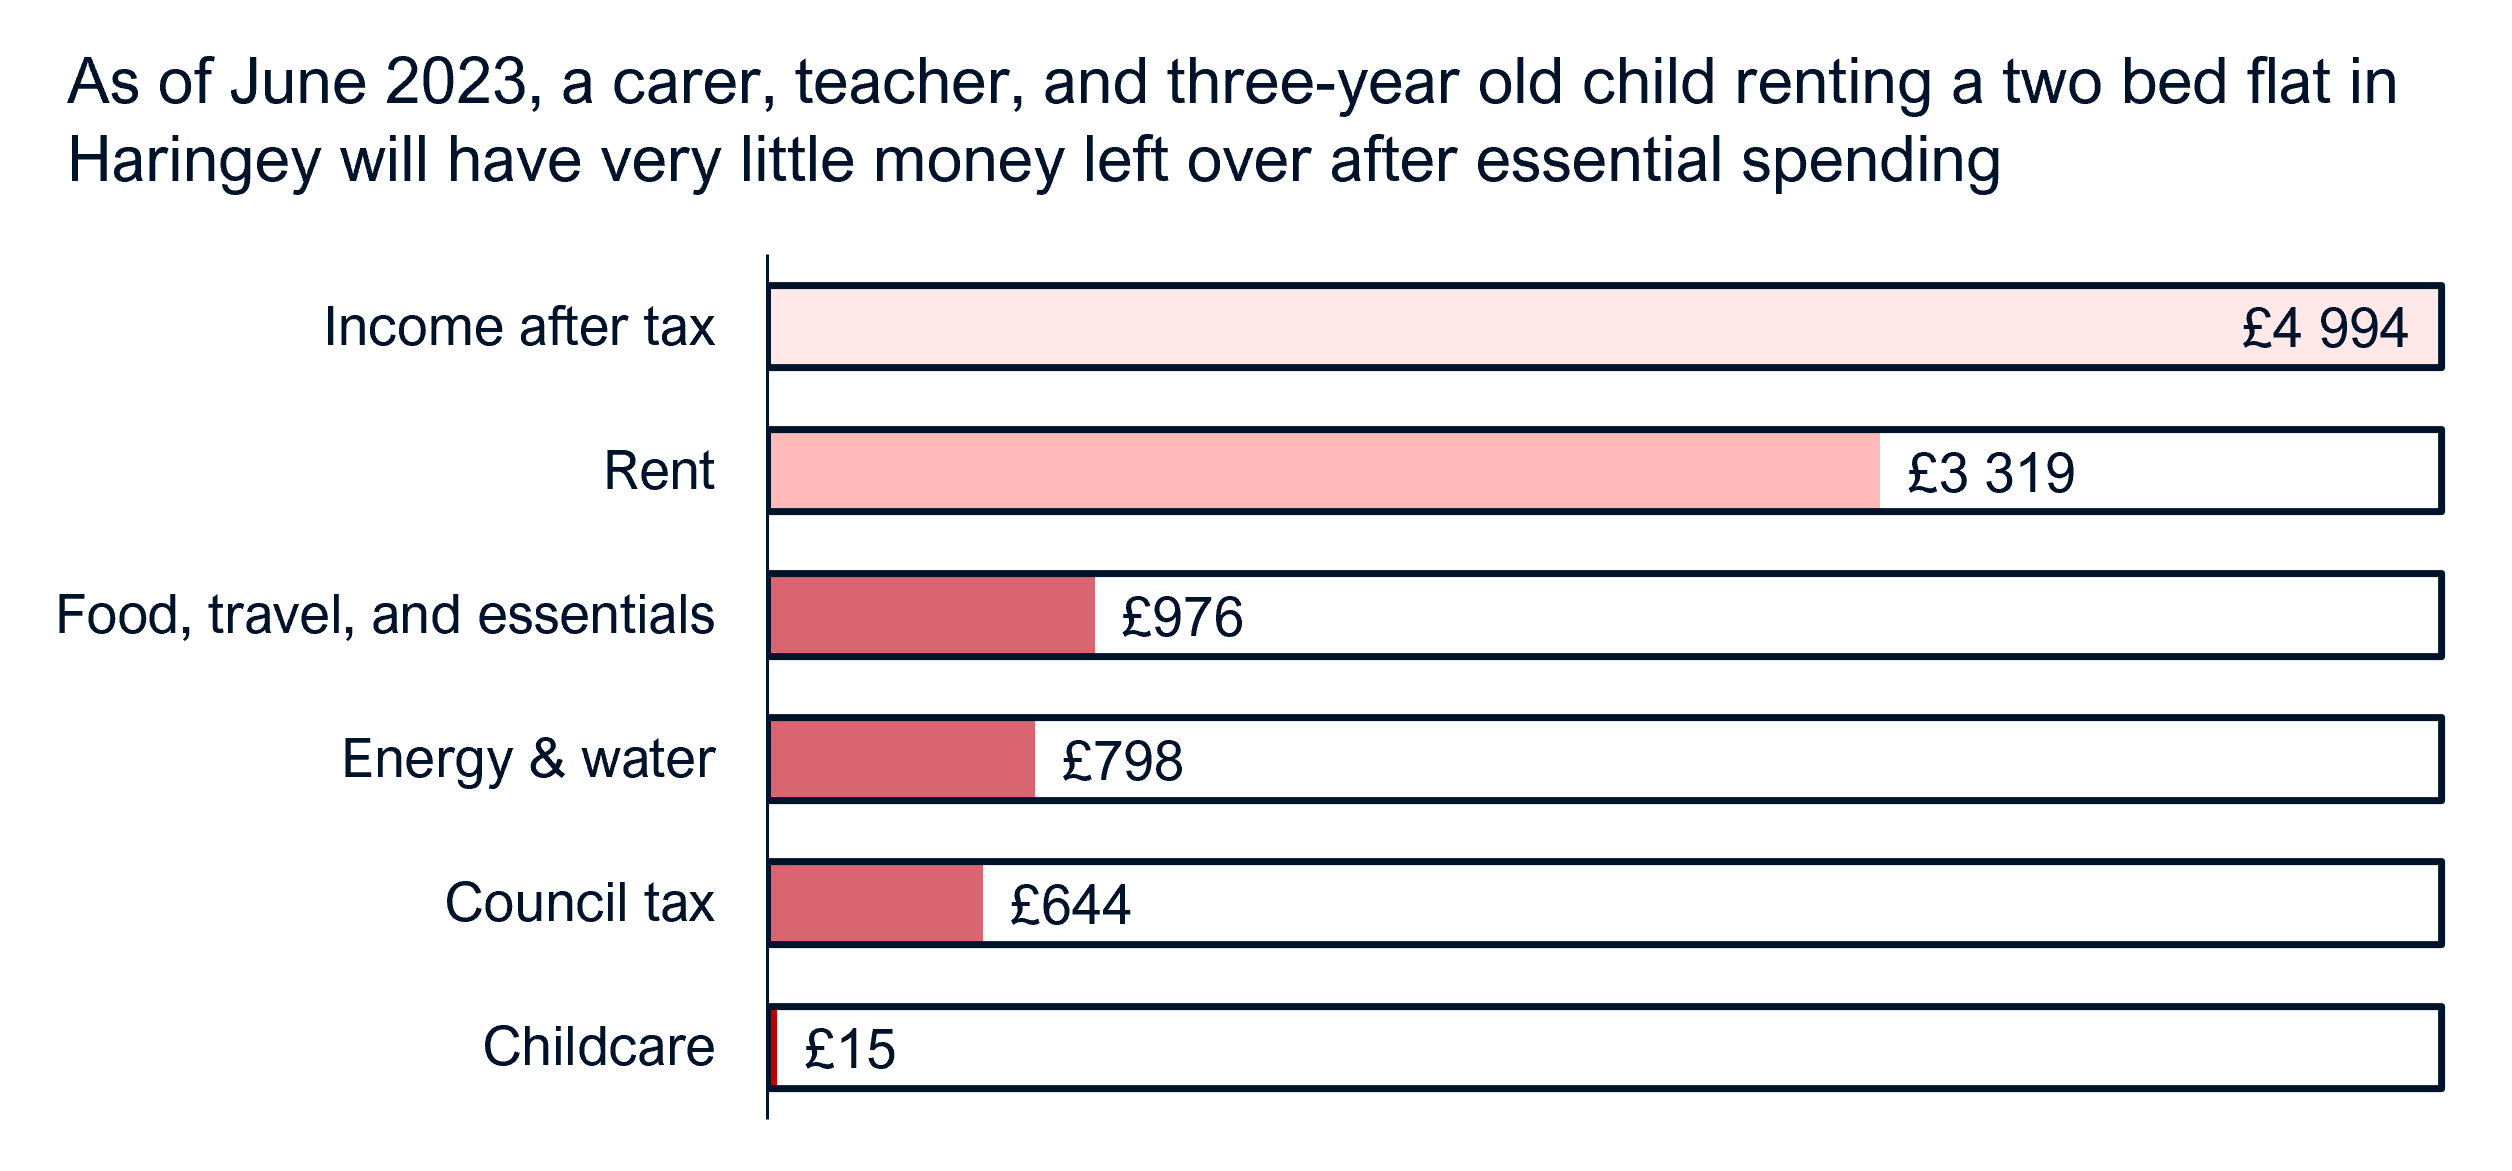 A graph showing that a teacher, carer, and three year old living in a rented two bedroom flat in haringey will only have around 15 pounds left at the end of each month after all household and essential spending